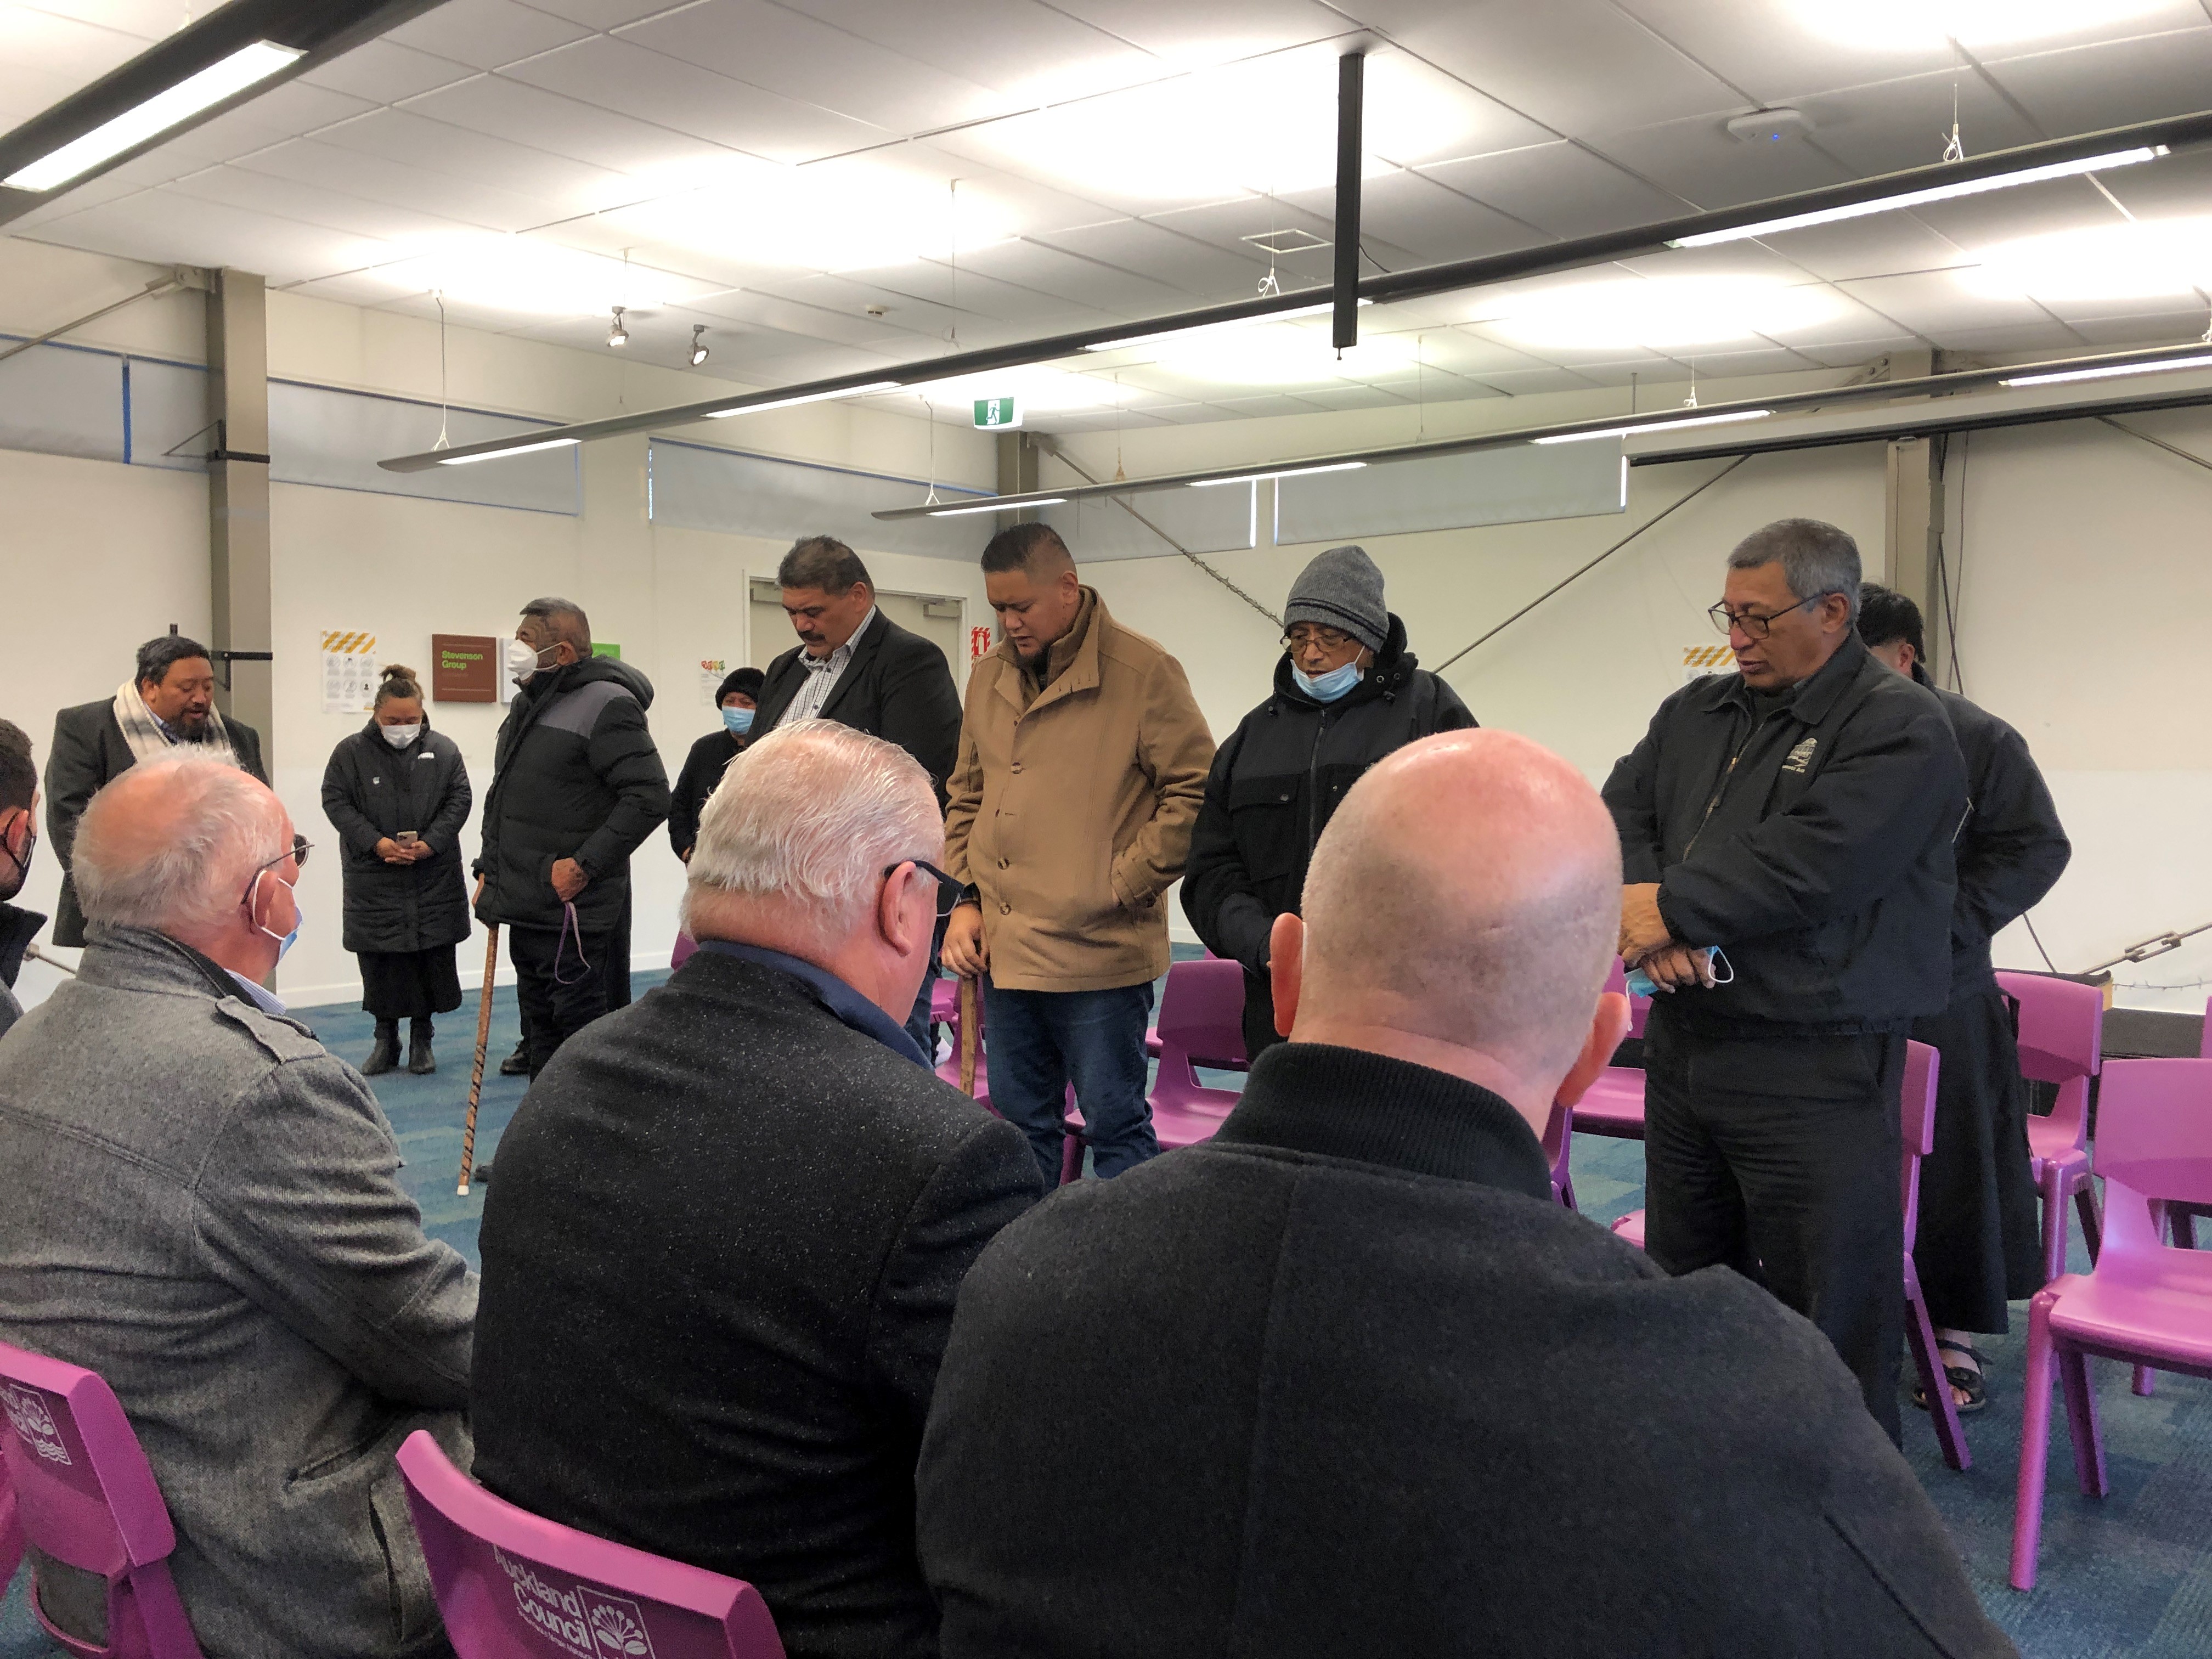 Mana whenua challenged the board to use the new space to work together to create unity.